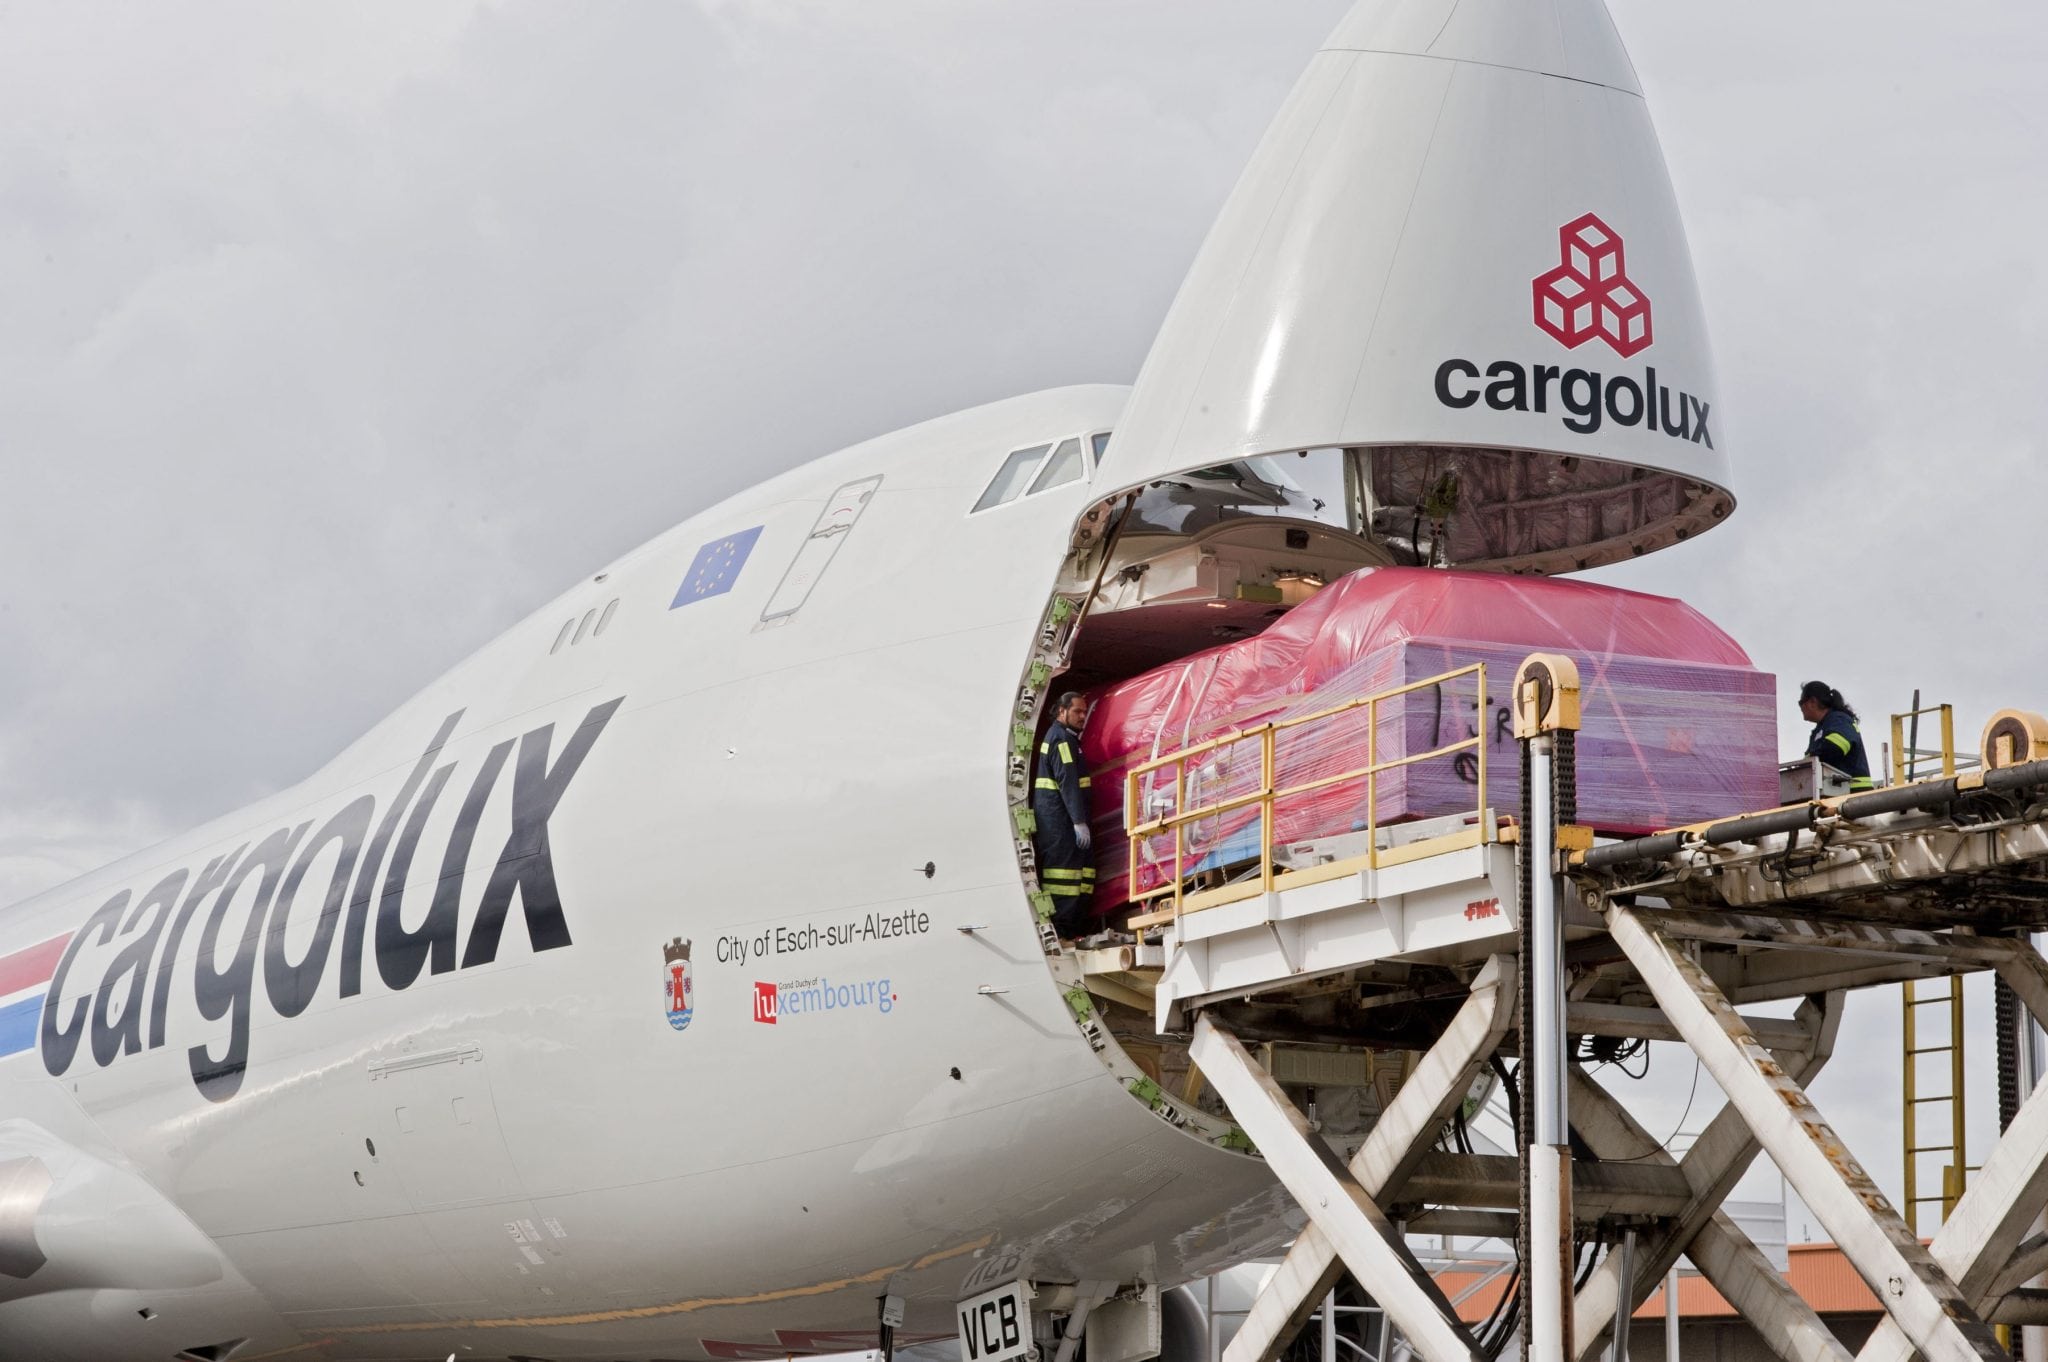 Boeing 747-8 aircraft being loaded with cargo